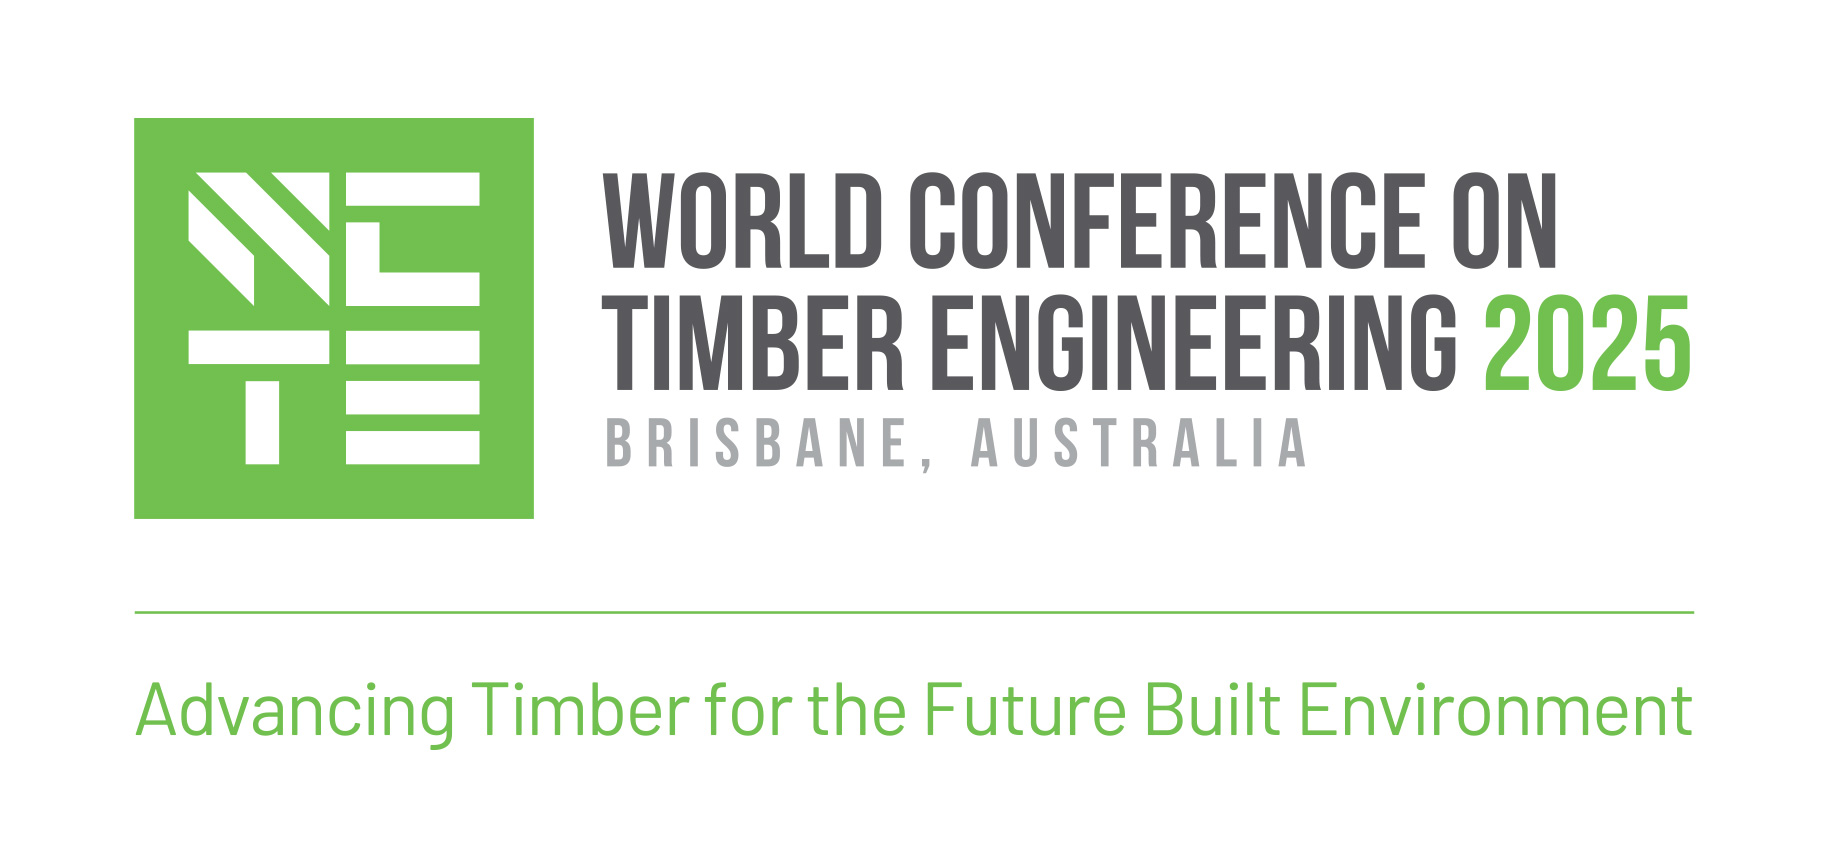 Call for Abstracts – World Conference on Timber Engineering 2025